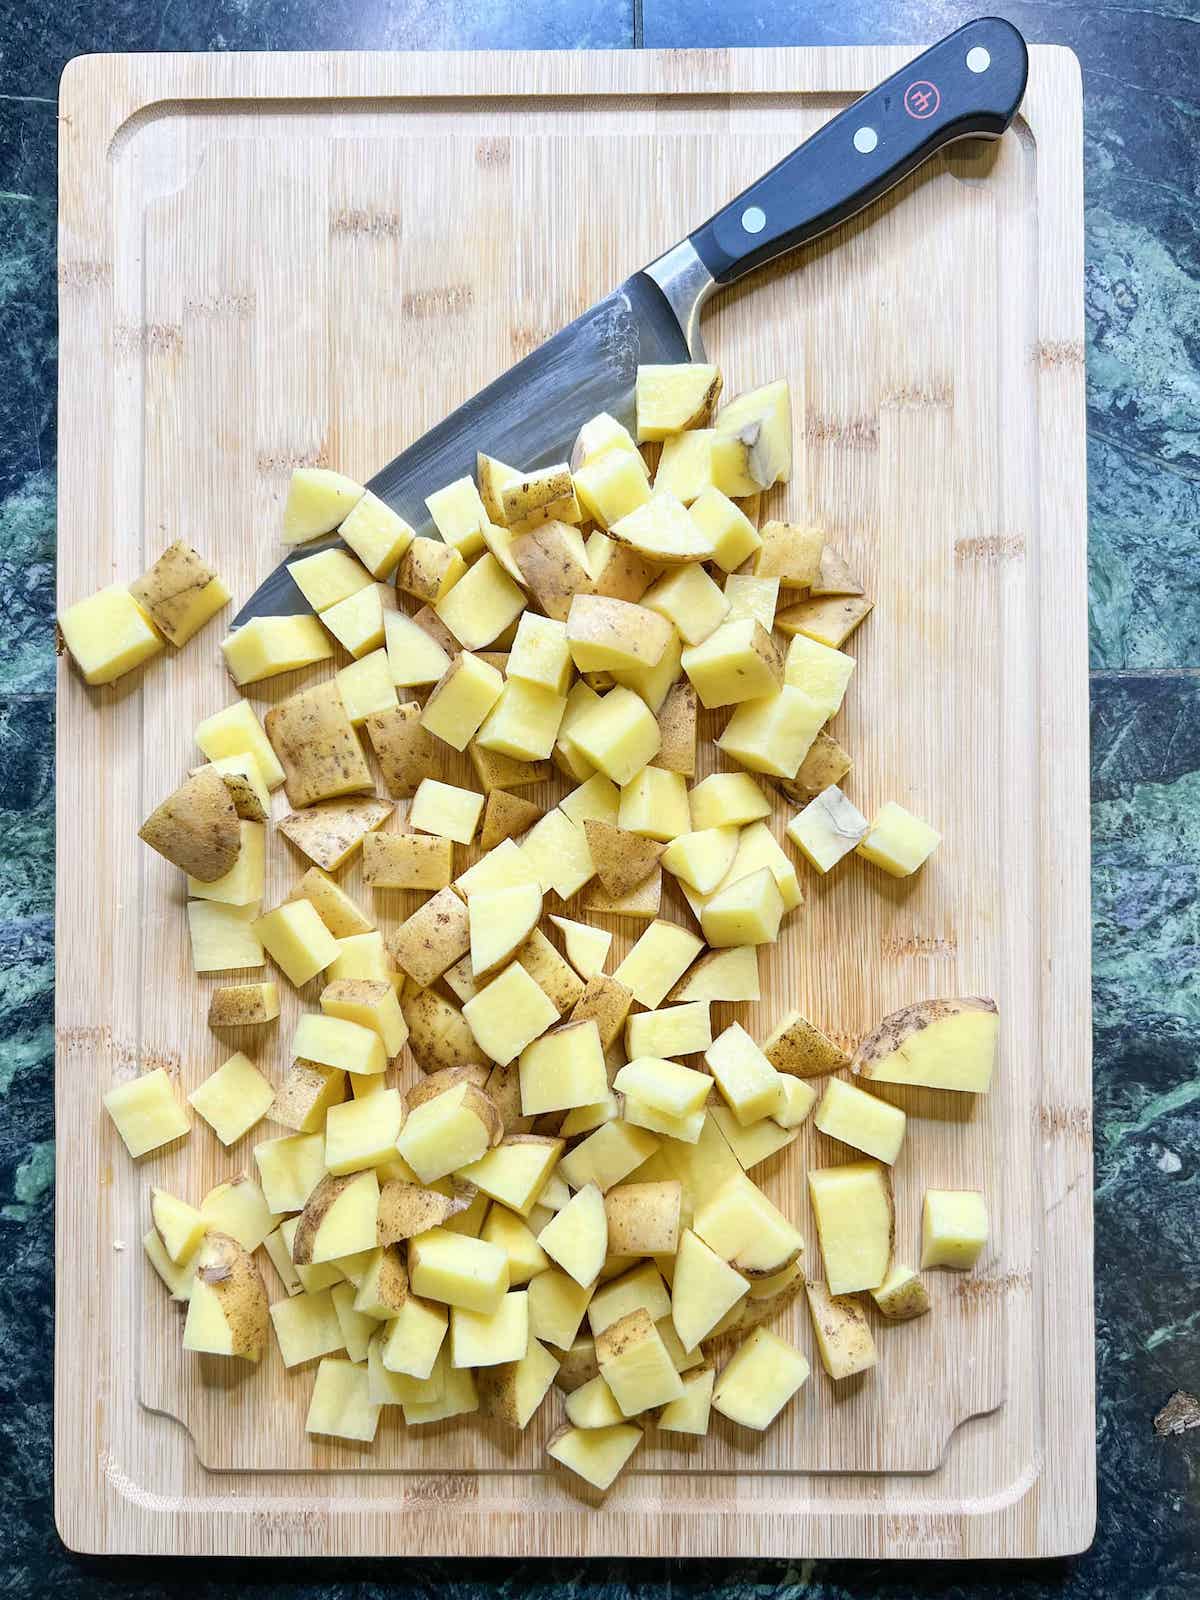 Cubed Yukon gold potatoes on a wood cutting board with a chef's knife.